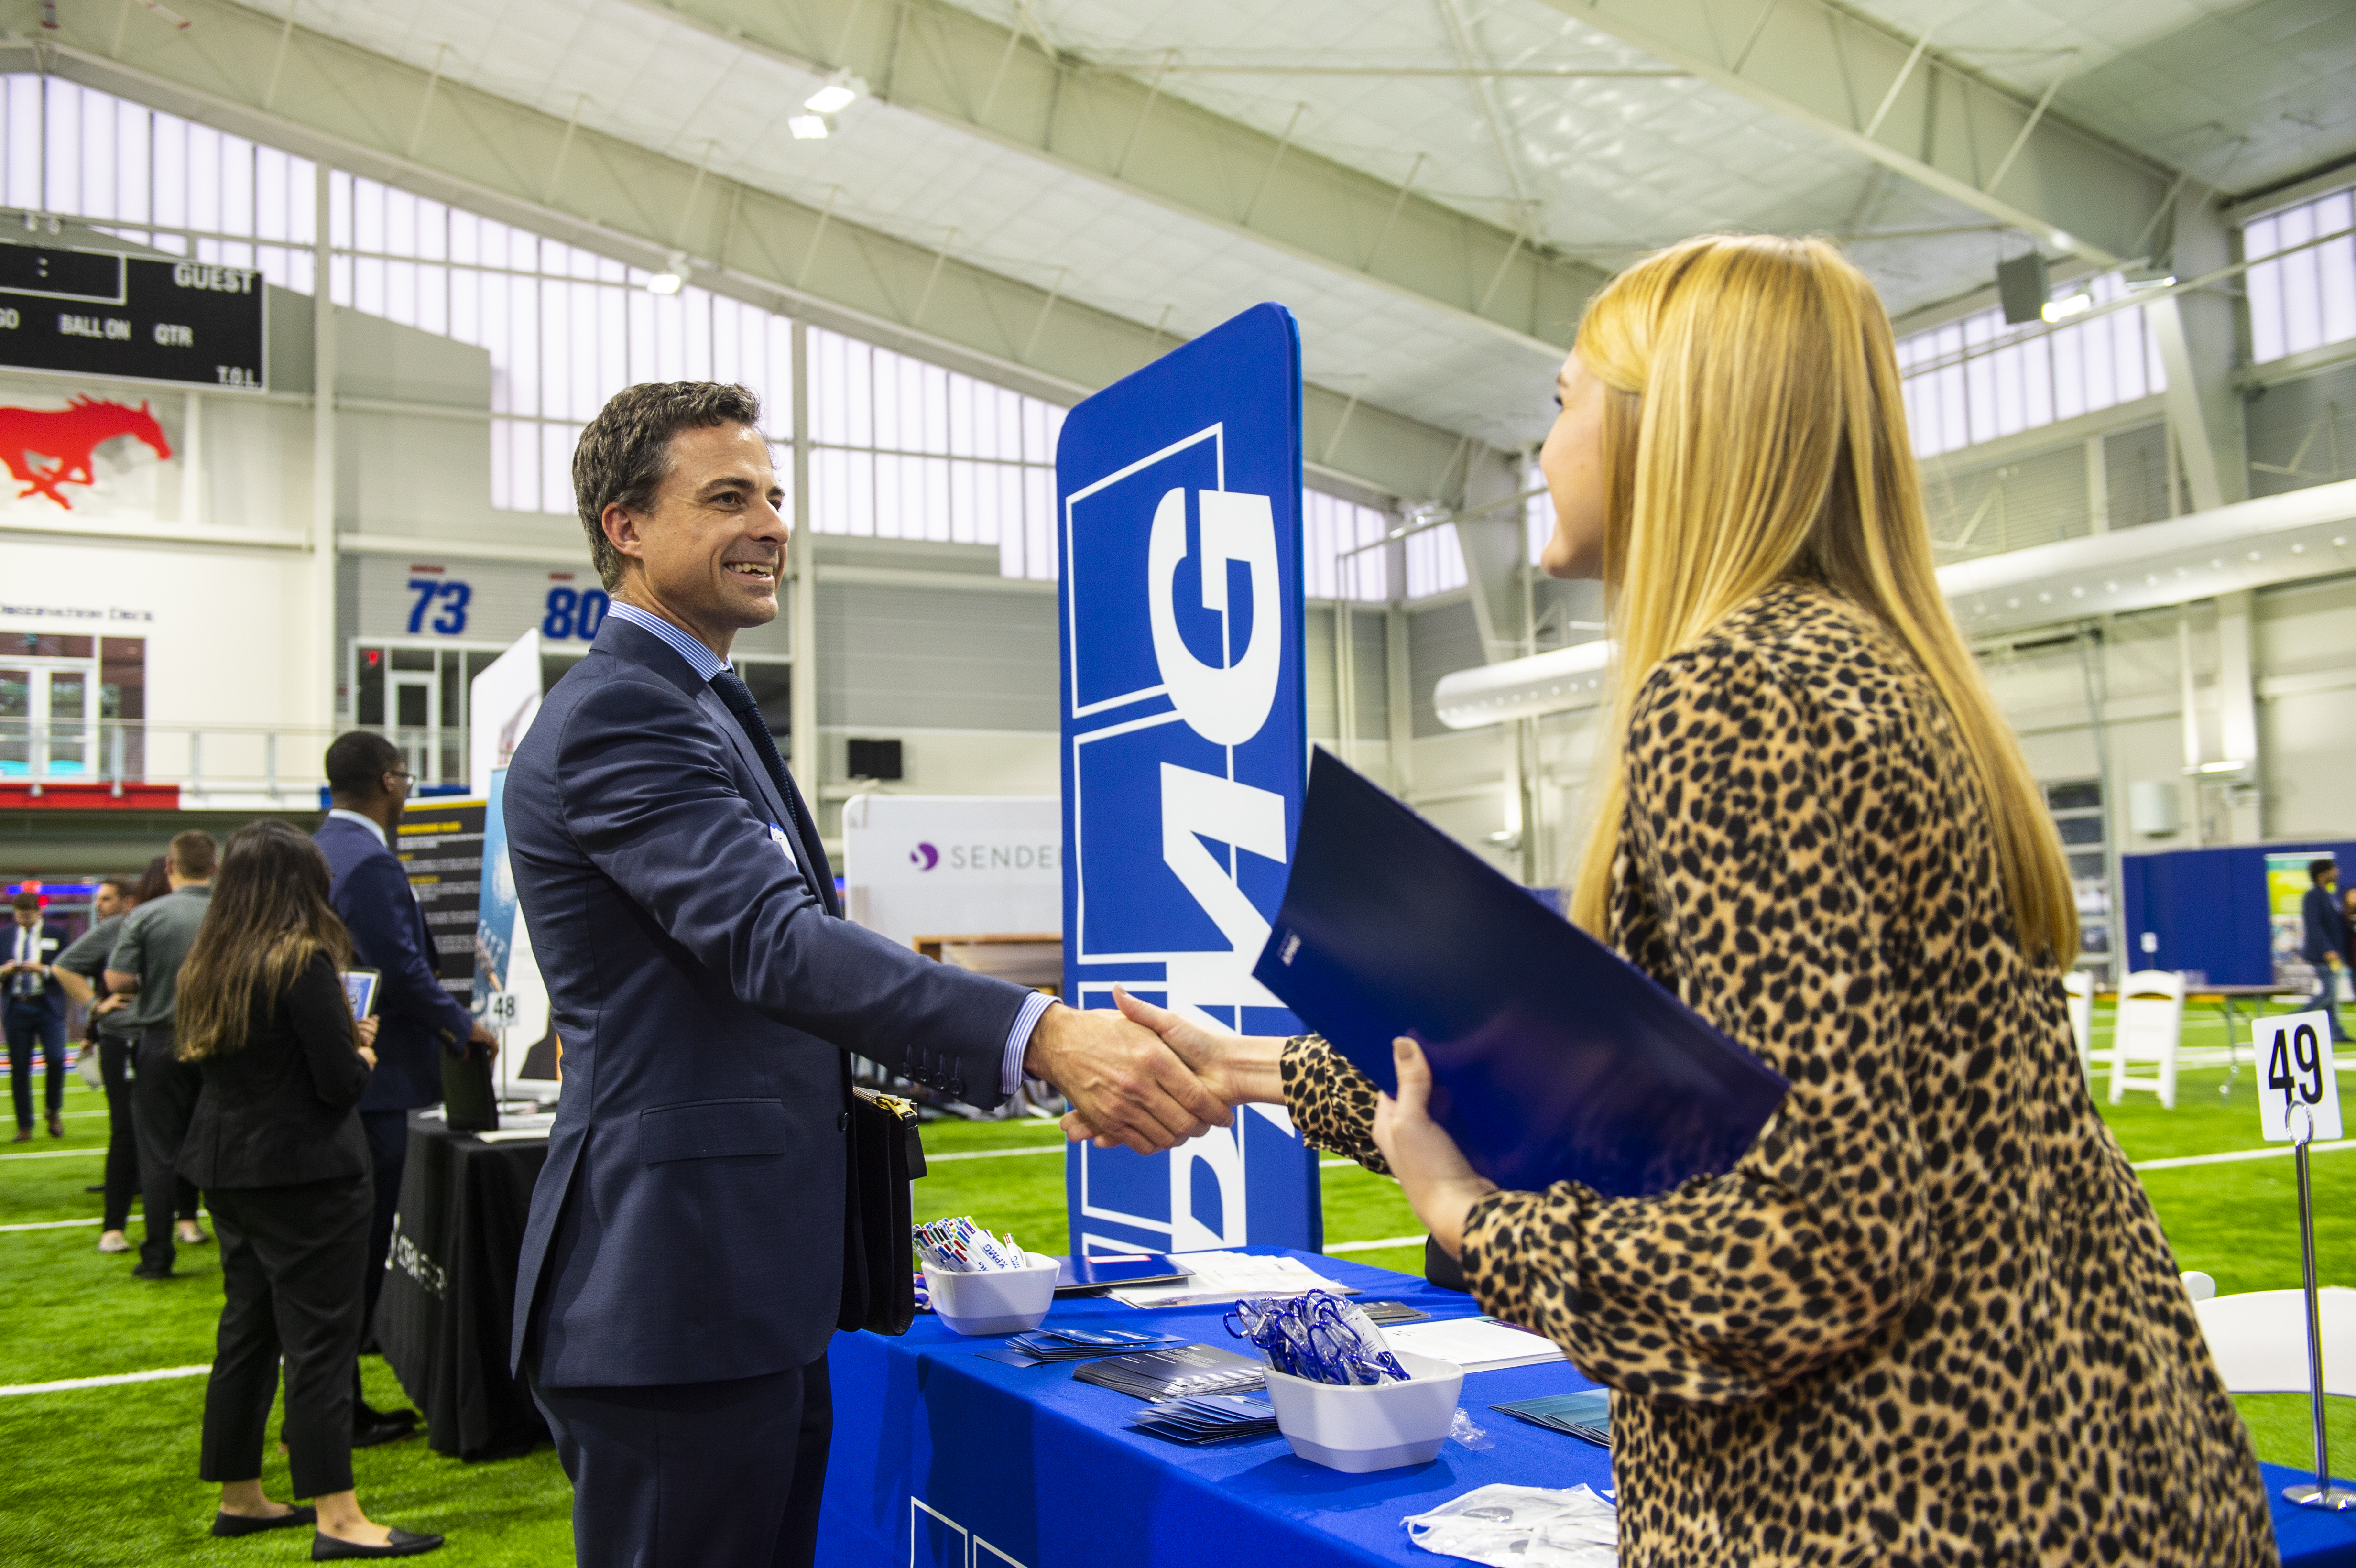 Recruiter and student shaking hands at a company booth